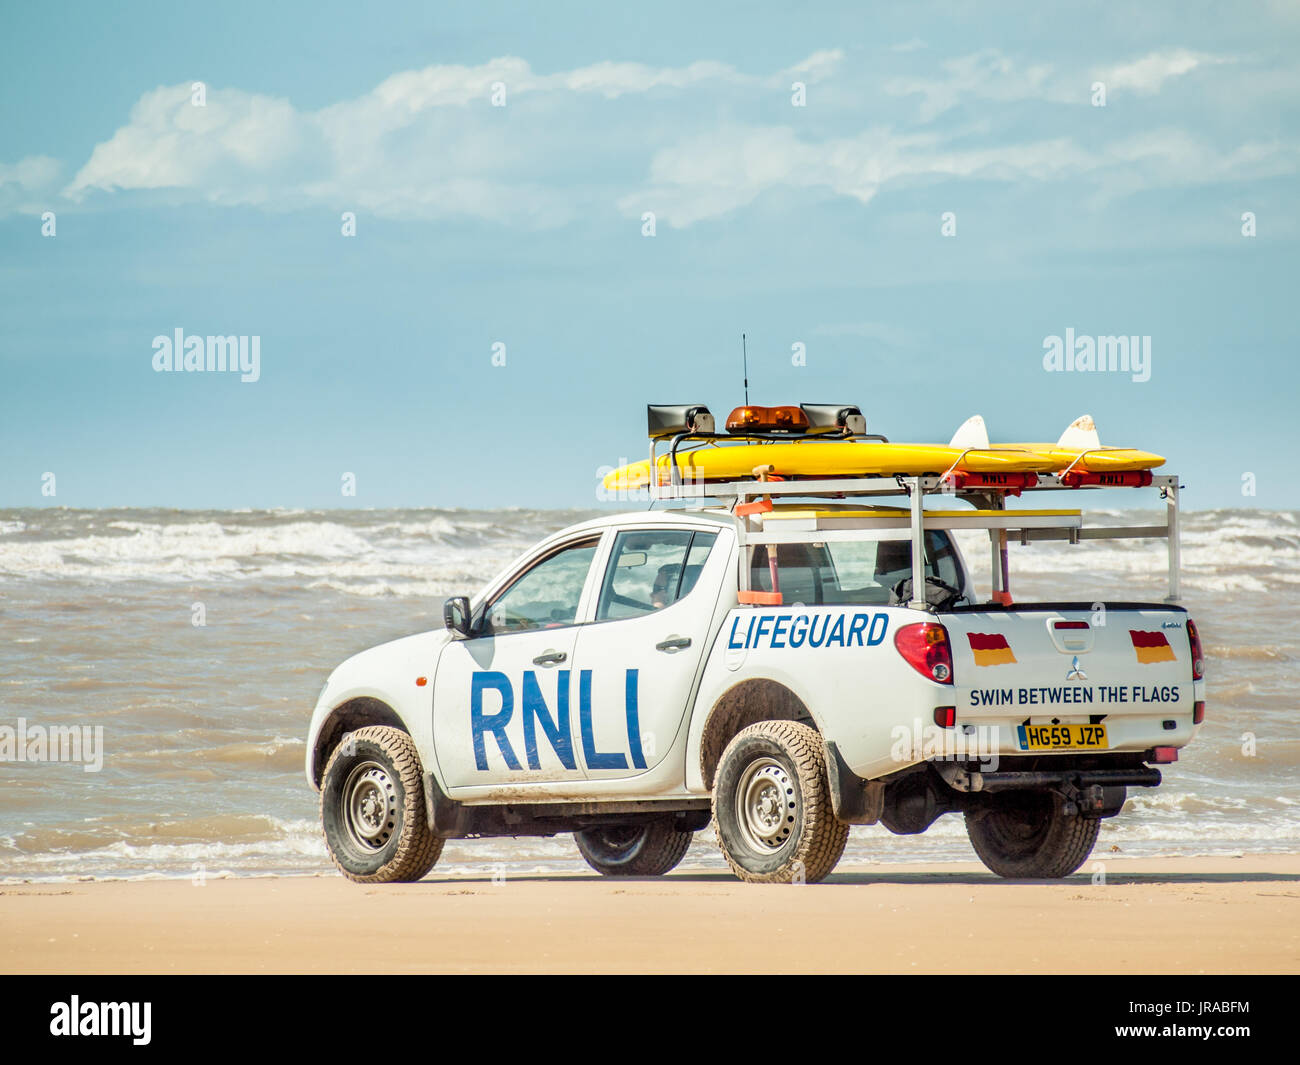 RNLI Pickup Truck on a beach with a surfboard Stock Photo